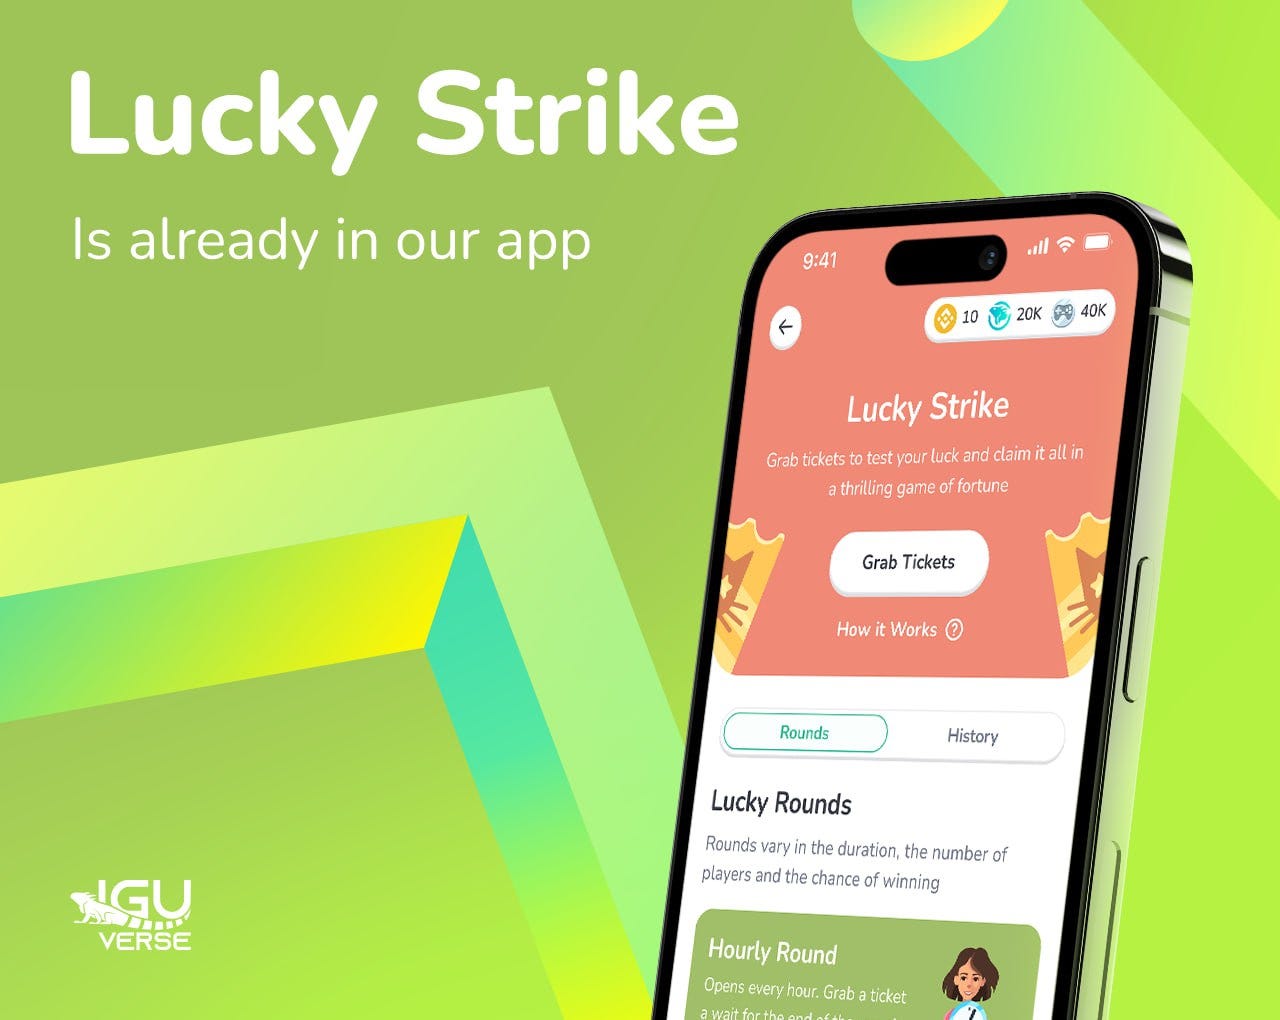 Try your luck in Lucky Strike NOW - IguVerse - Medium